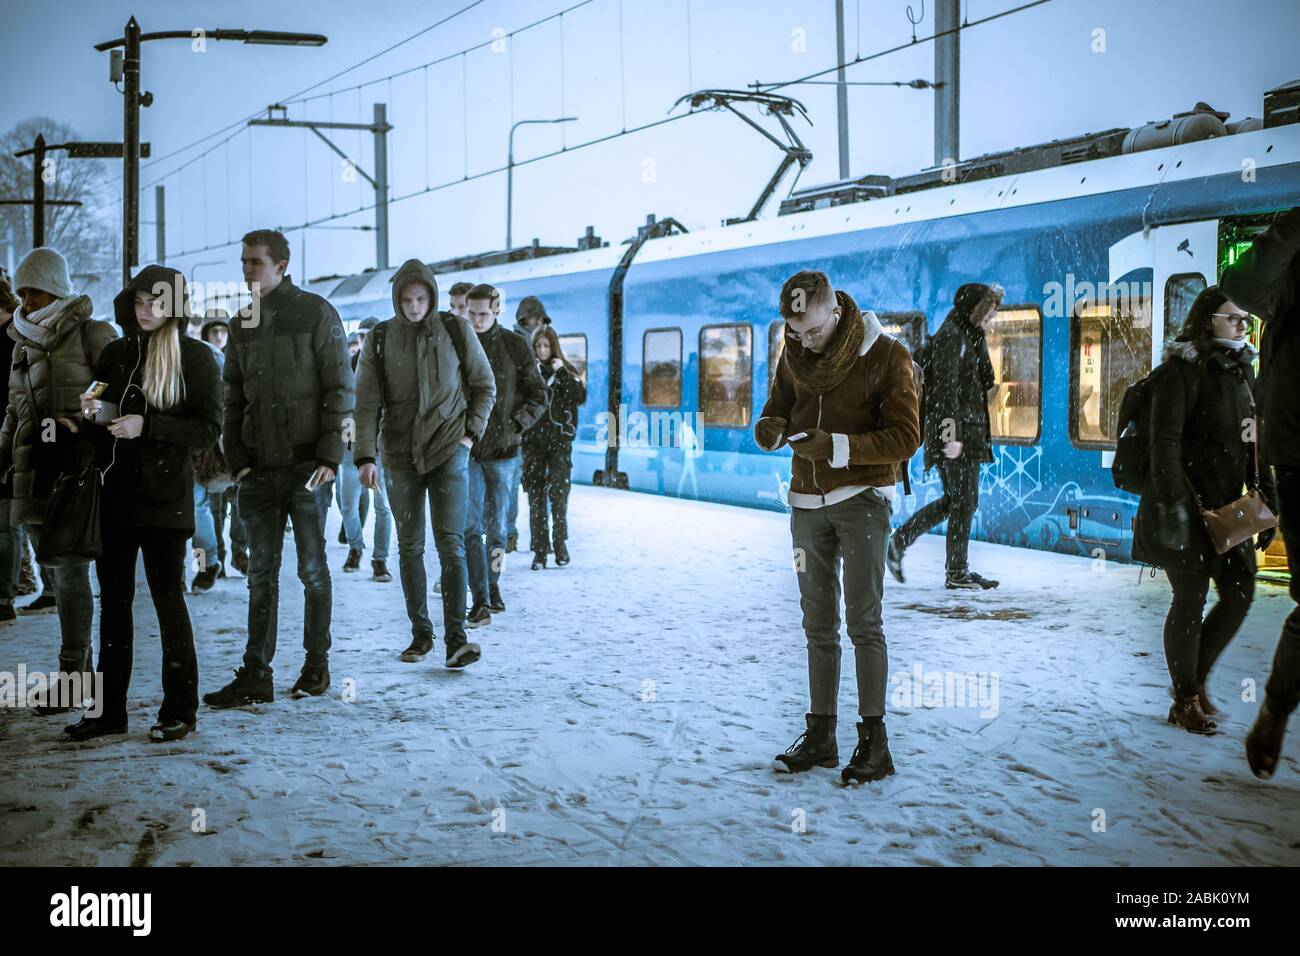 During late afternoon, a Keolis train from Zwolle has arrived in snow coverd Kampen, Netherlands. Stock Photo